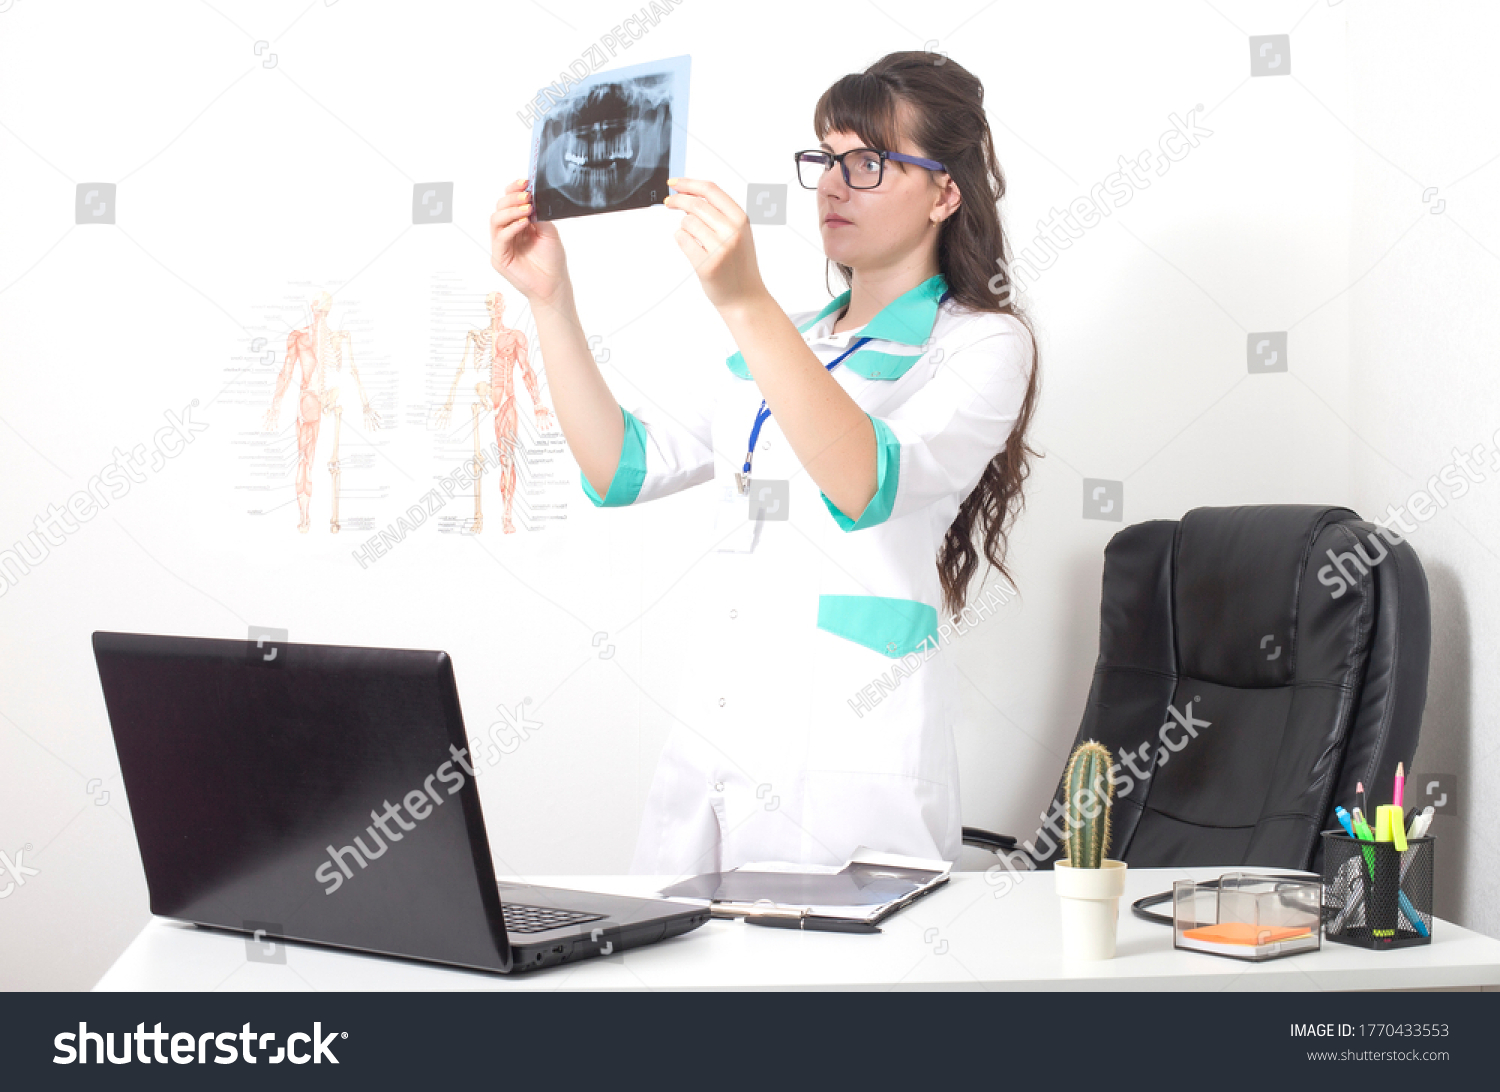 Dentist doctor watching x-ray picture orthopantomogram of jaw and teeth. Dentures, caries and pulpitis of wisdom teeth, background #1770433553